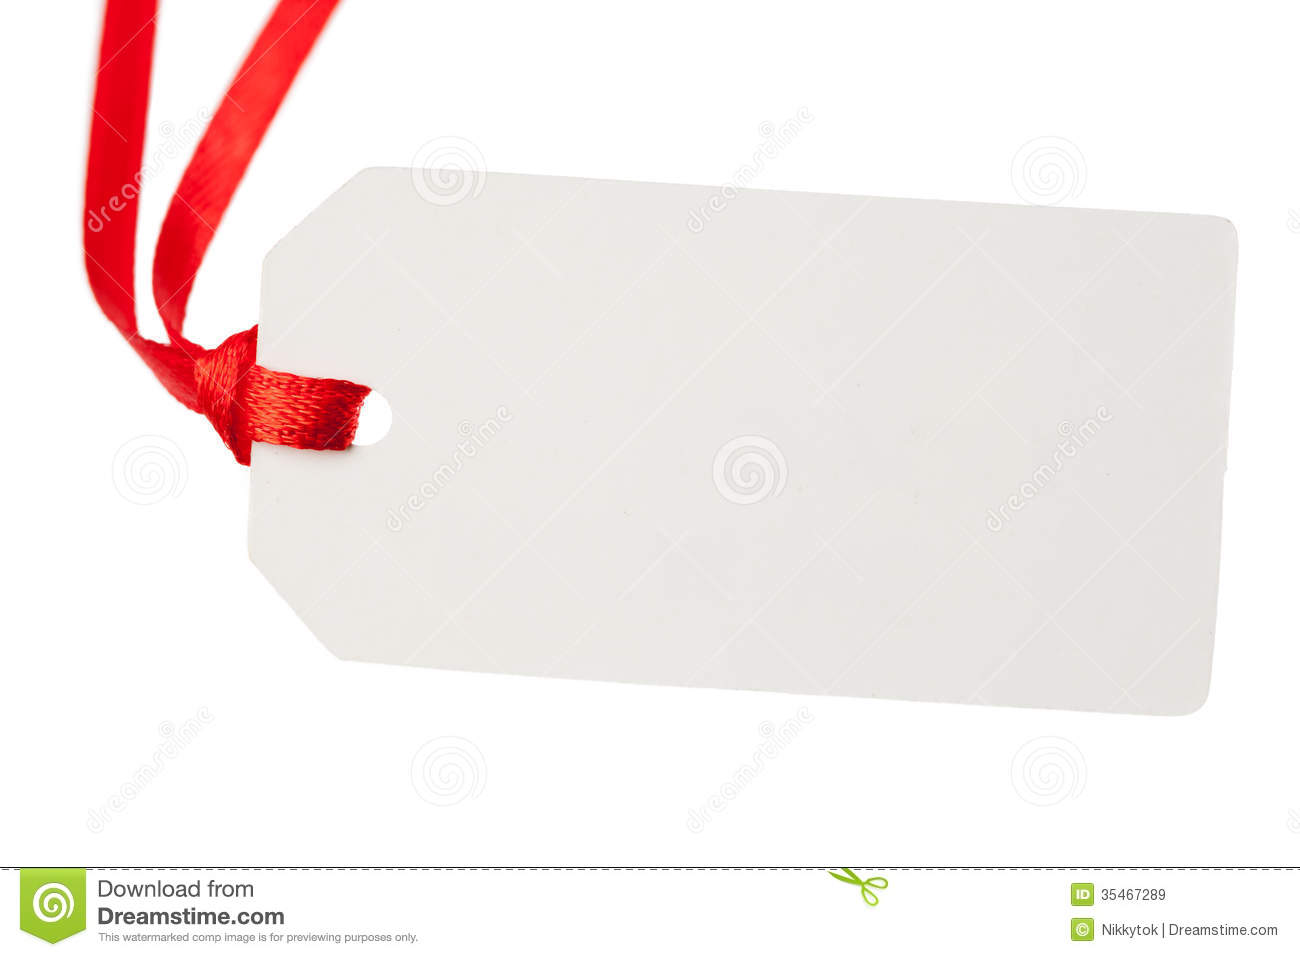 Blank Gift Tag With Red Ribbon Royalty Free Stock Images   Image